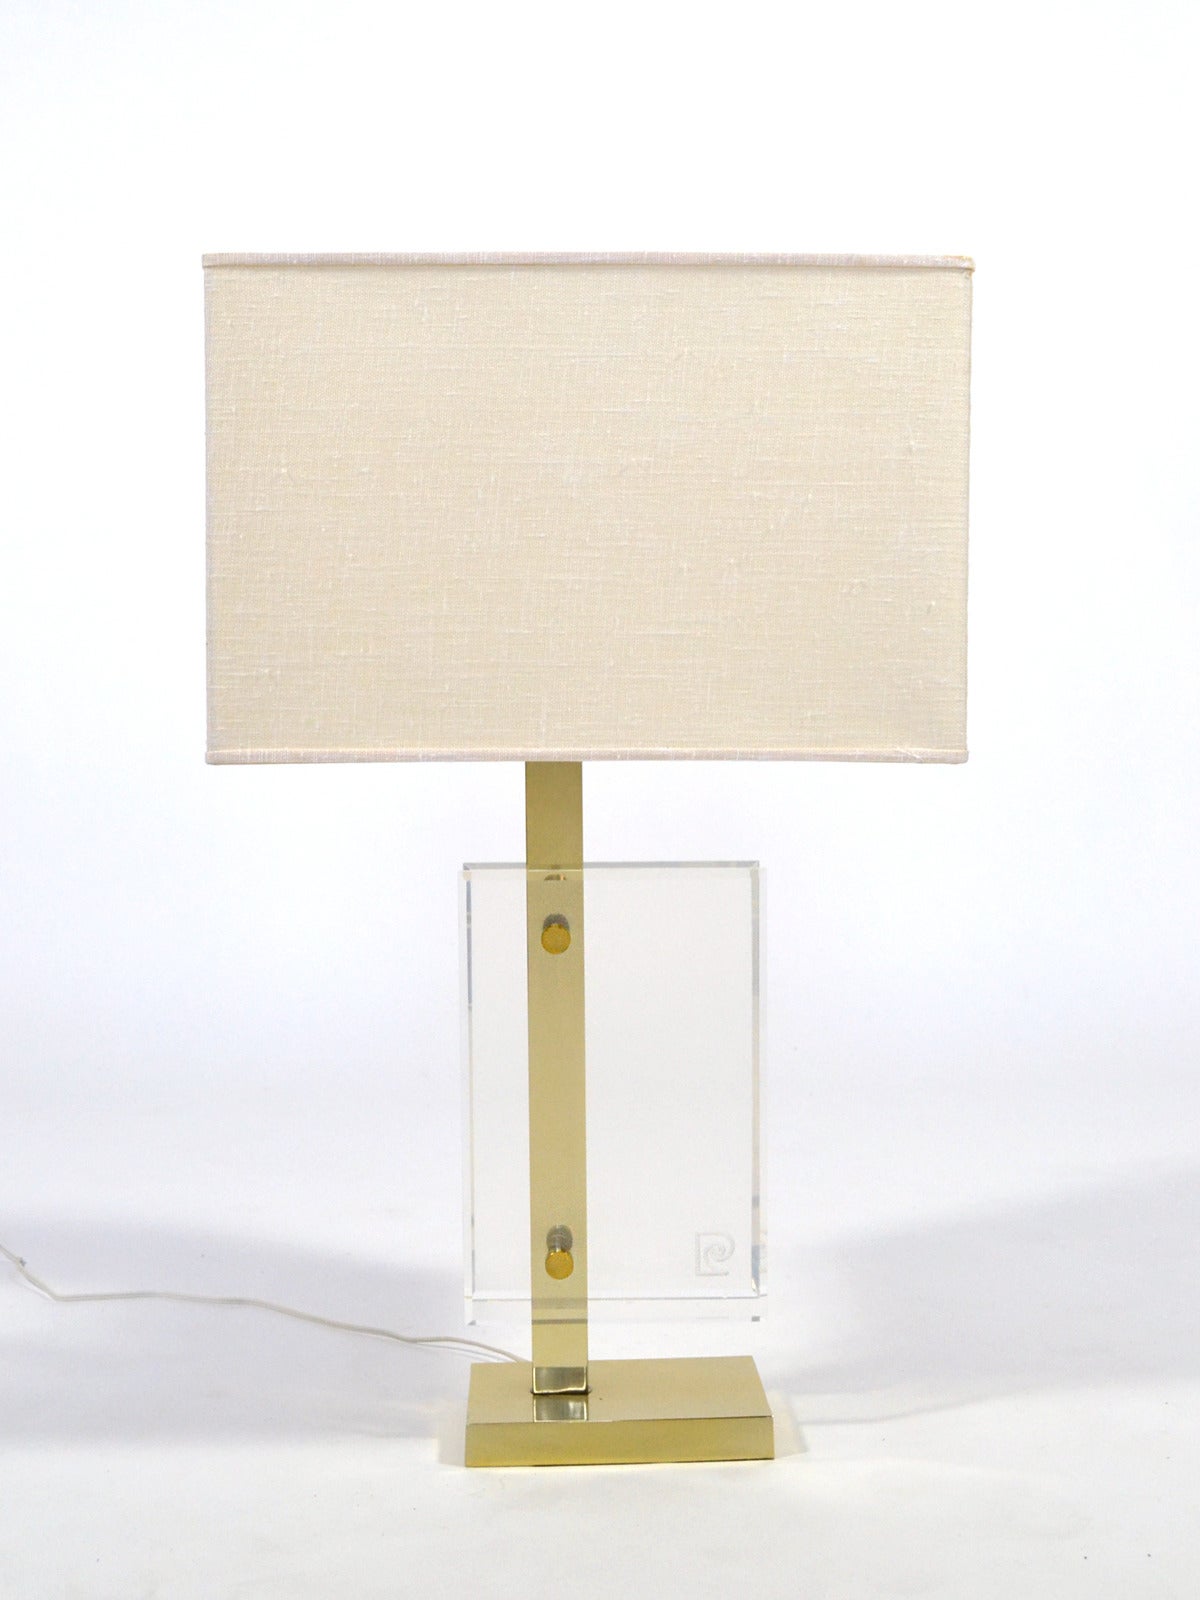 A terrific asymmetrical design, this Pierre Cardin table lamp has a base of brass with a pair of Lucite forms, one etched with the Cardin logo. It retains the original rectangular linen shade. Like Cardin's fashion designs, the lamp is elegant, sexy